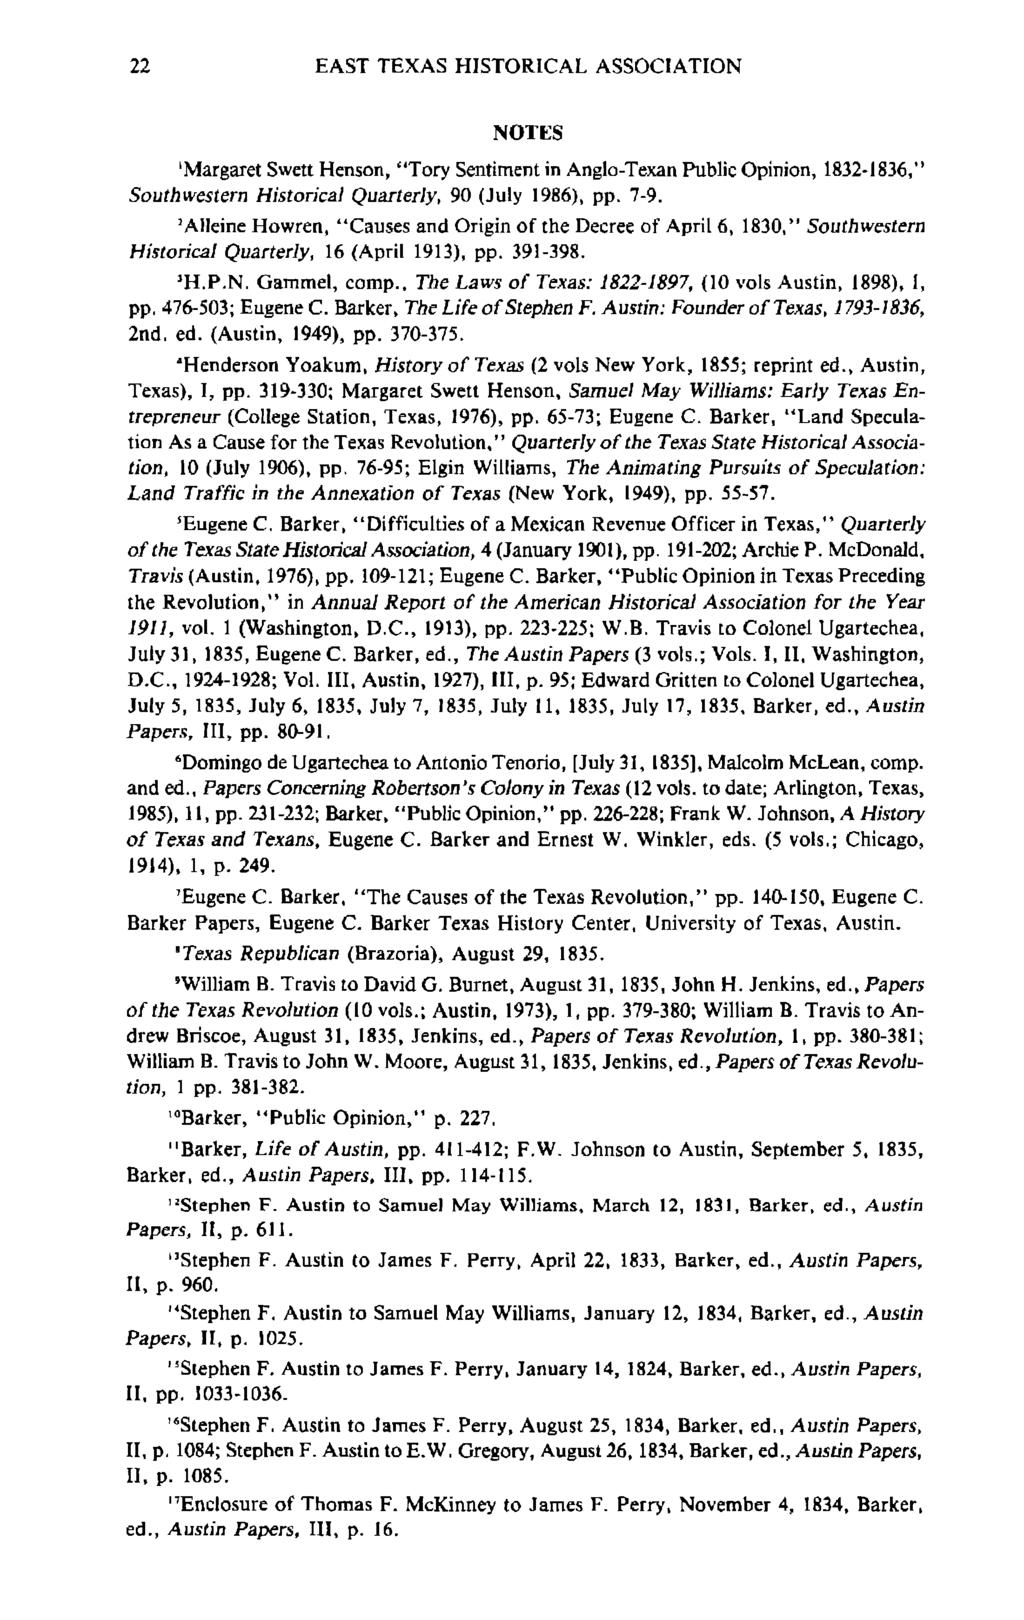 22 EAST TEXAS HISTORICAL ASSOCIAnON NOTI-:S IMargaret Swett Henson, "Tory Sentiment in Anglo-Texan Public Opinion, 1832-1836," Southwestern Historical Quarterly, 90 (July 1986), pp. 7-9.